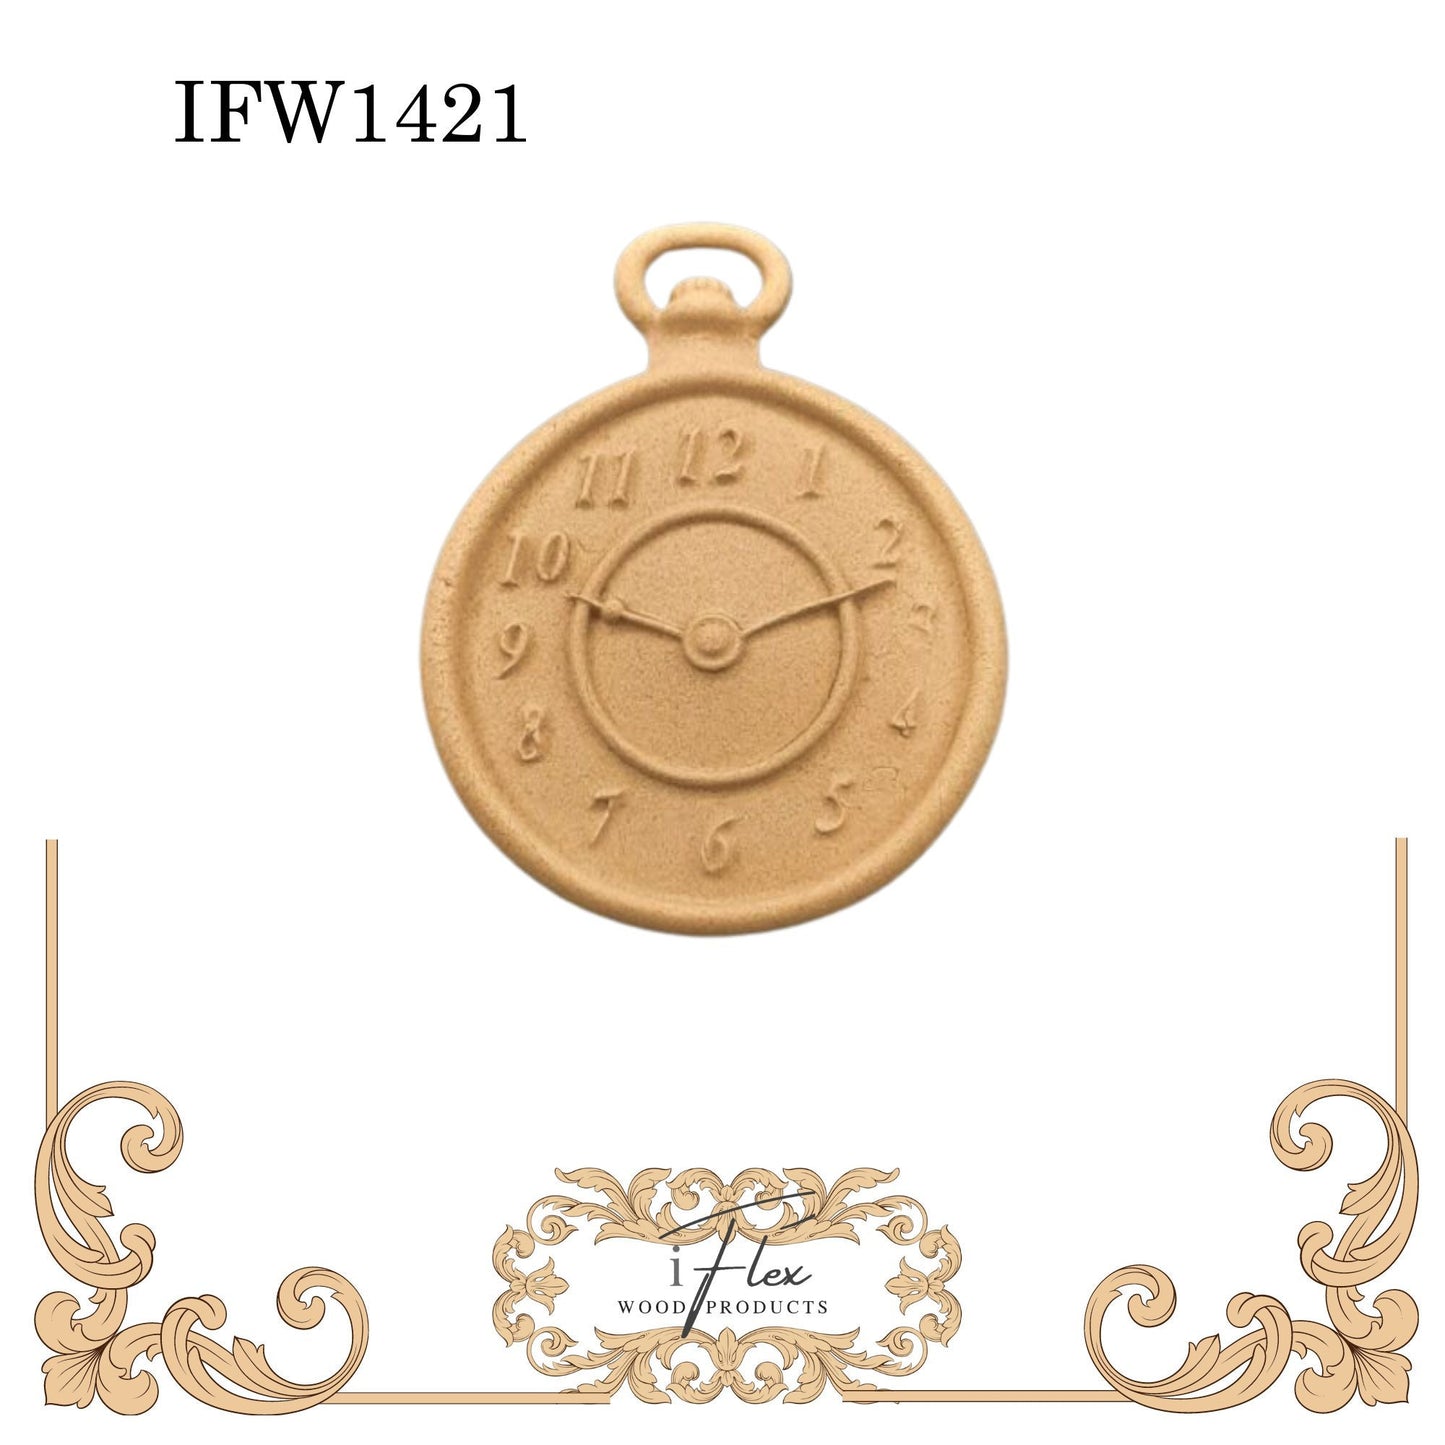 IFW 1421 iFlex Wood Products, bendable mouldings, flexible, wooden appliques, steampunk, clock